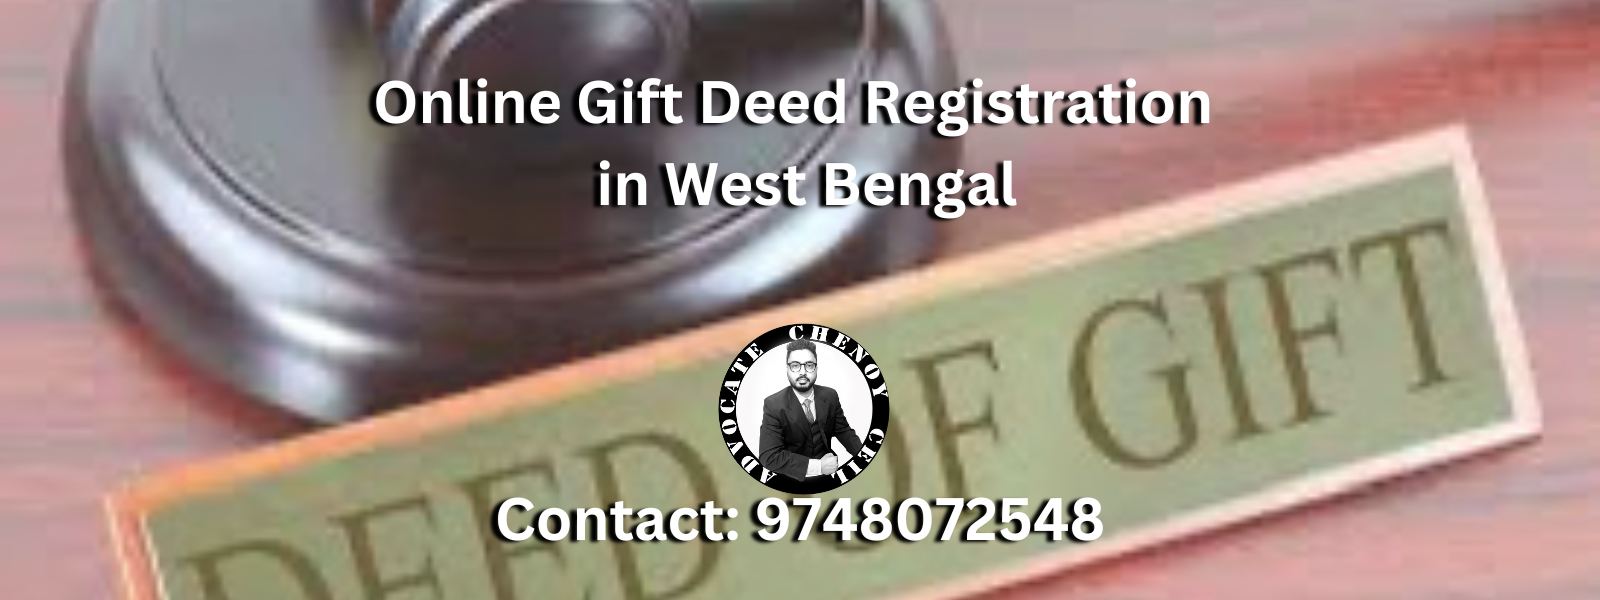 Gift Deed Registration in West Bengal